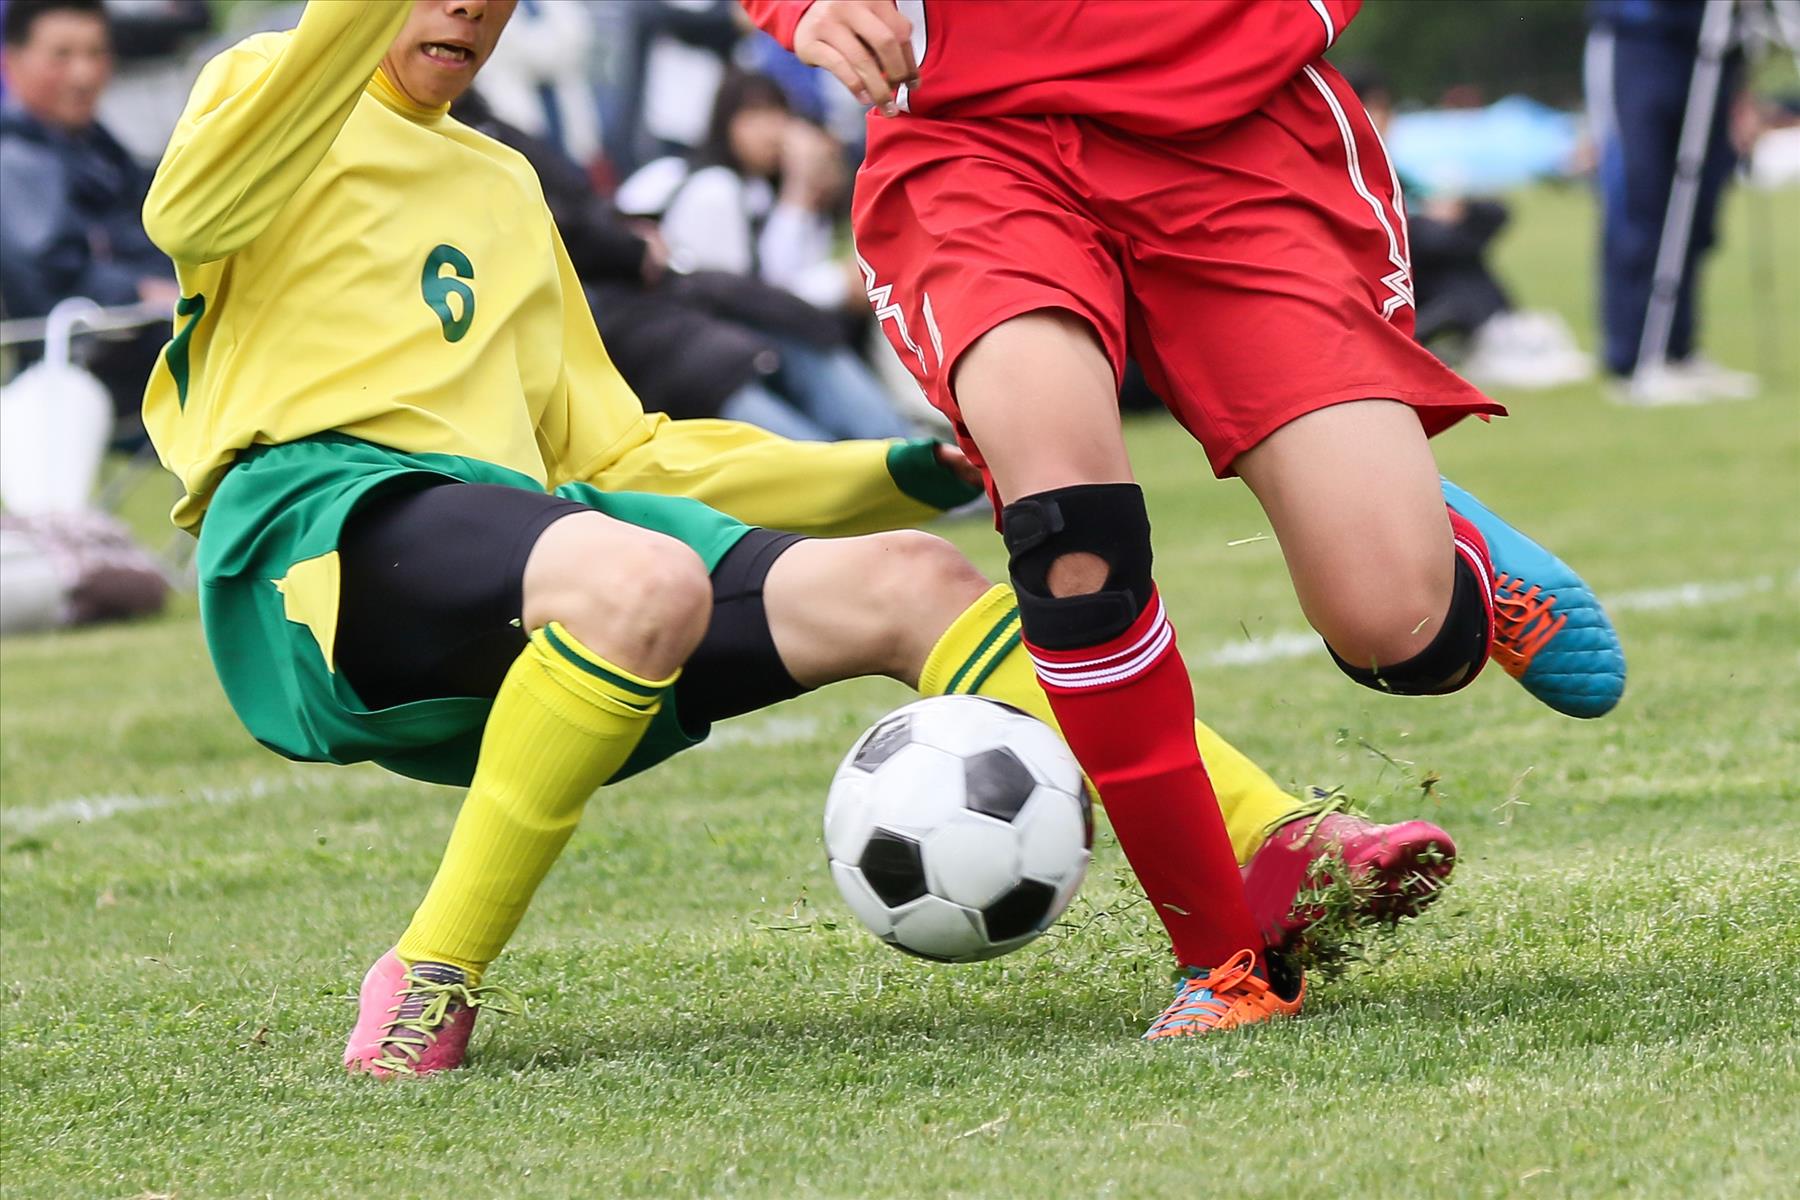 Hiring a Sports Injury Lawyer after Sustaining a Common Sports Injury